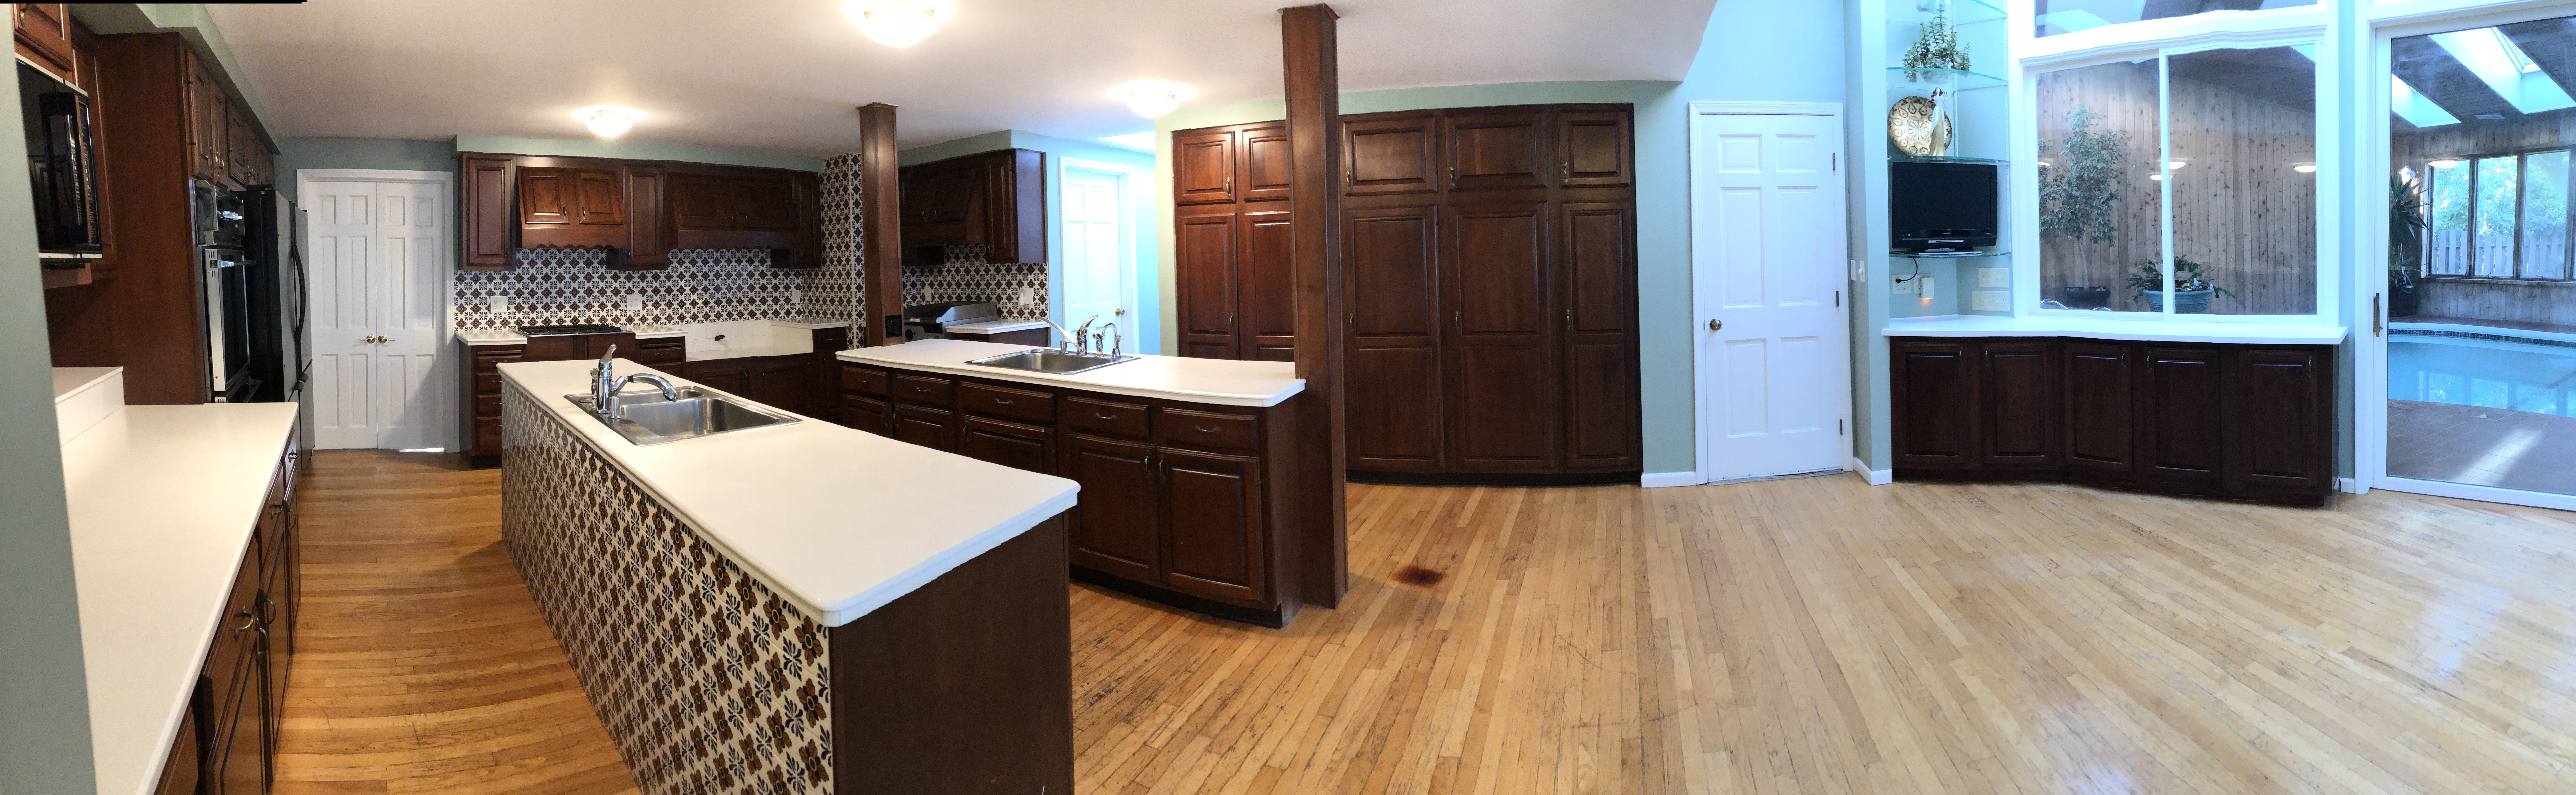 18 Cute Hardwood Floor Refinishing Amherst Ny 2023 free download hardwood floor refinishing amherst ny of 170 brantwood rd amherst ny 14226 realestate com within is6abt7i7l3urm1000000000